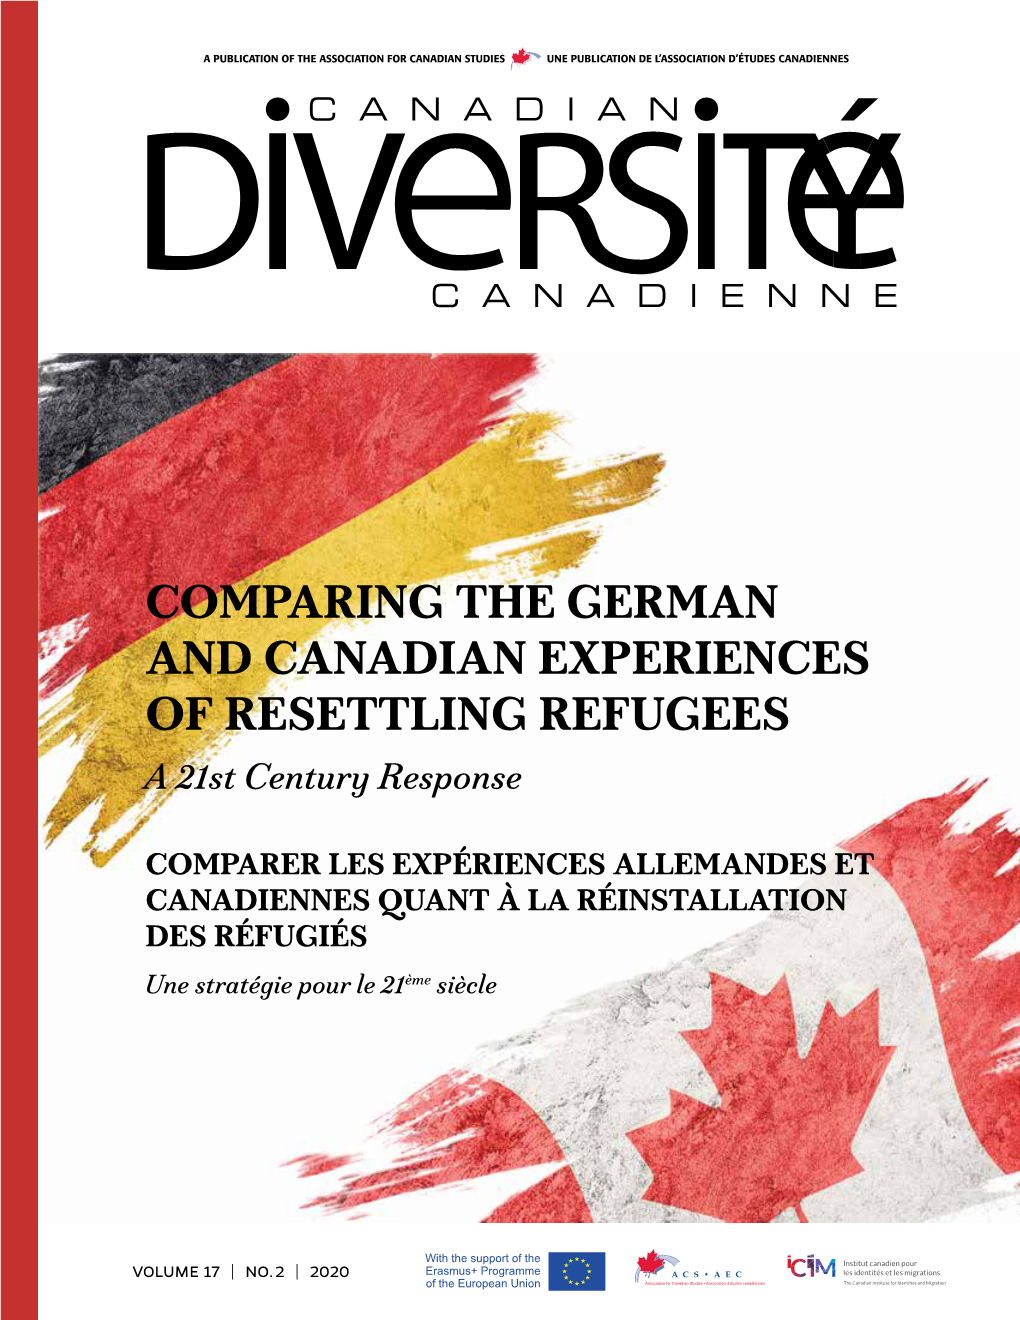 COMPARING the GERMAN and CANADIAN EXPERIENCES of RESETTLING REFUGEES a 21St Century Response